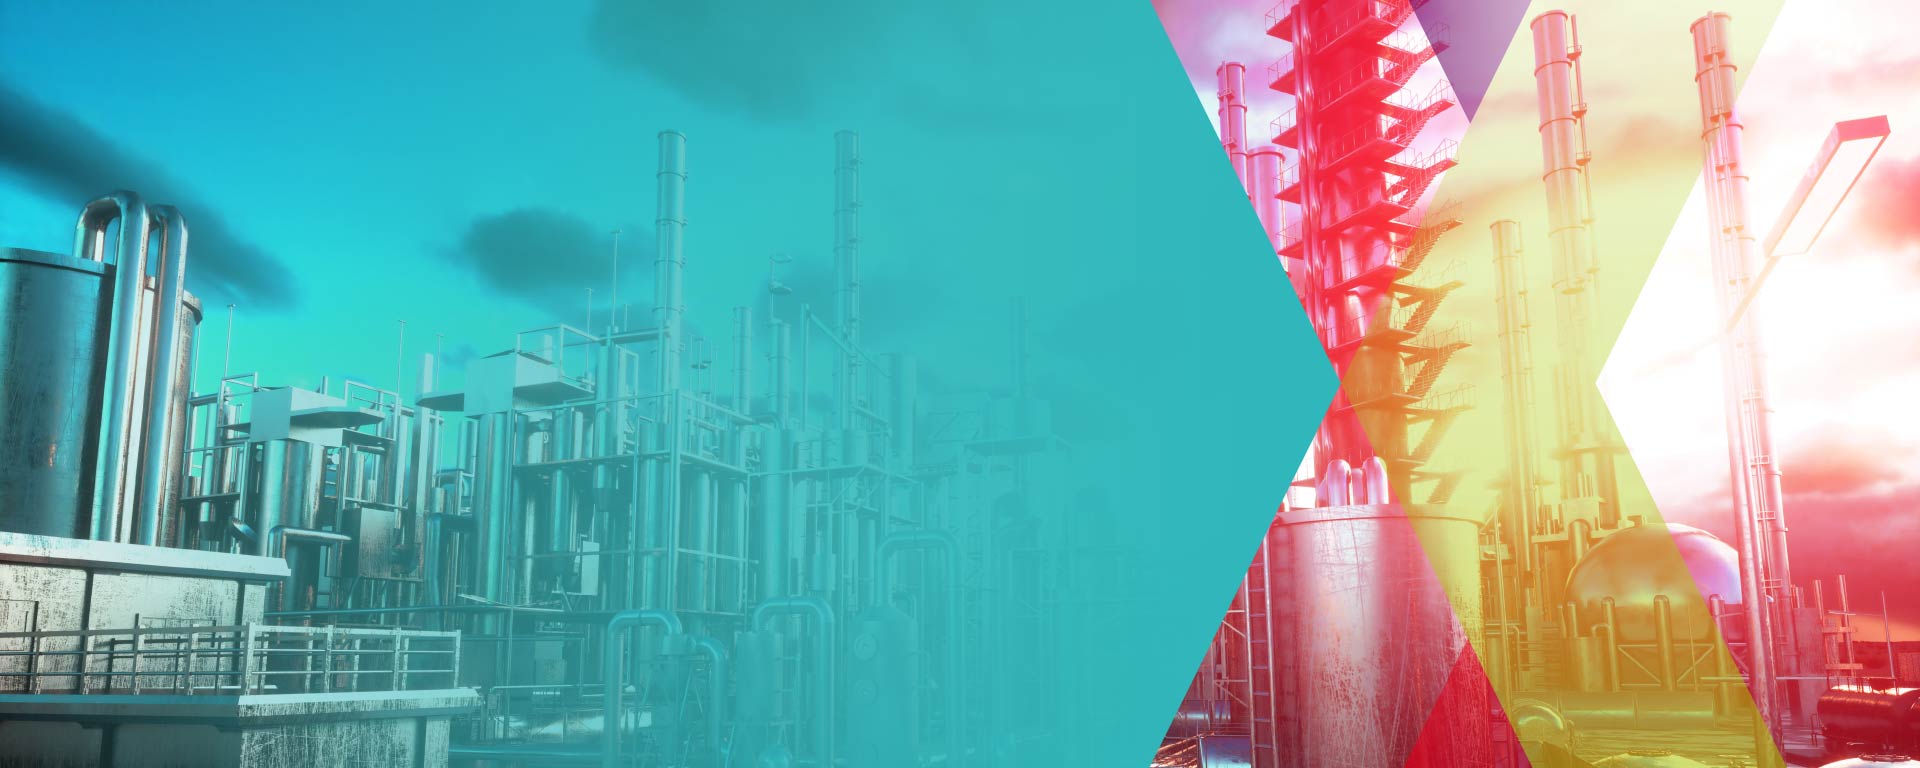 As industrial service provider, XERVON offers a range of services tailored to the respective requirements in the chemical and petrochemical industry.